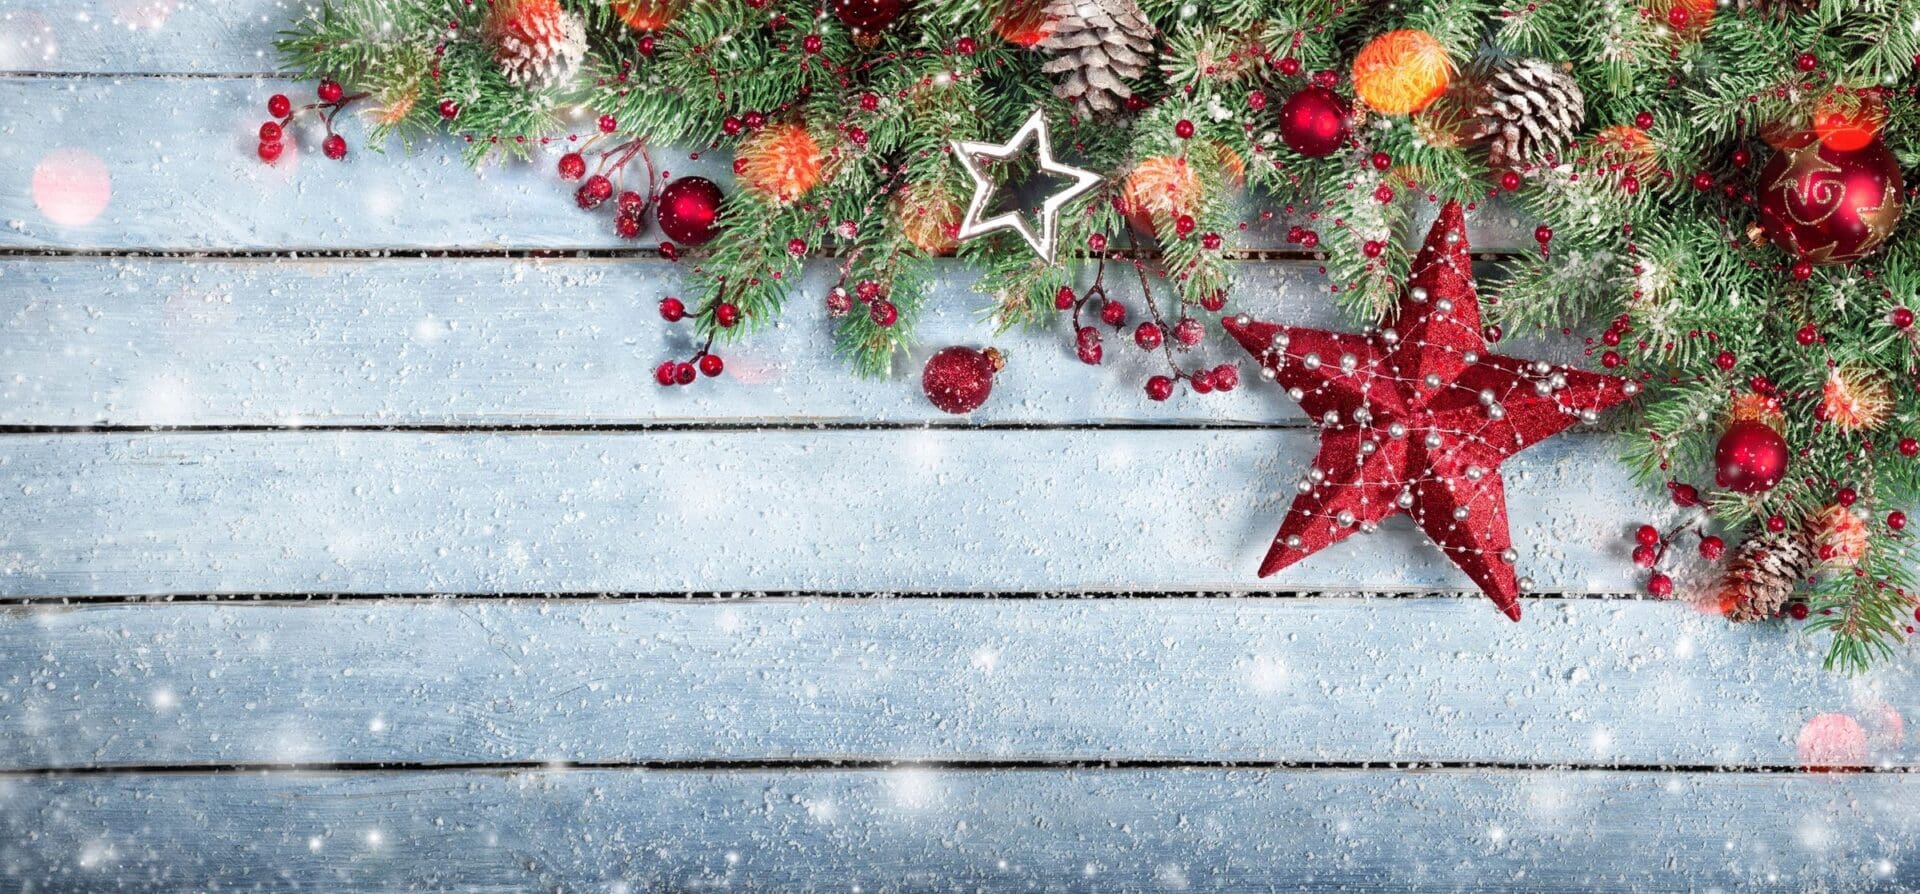 Christmas decorations on a wooden background.